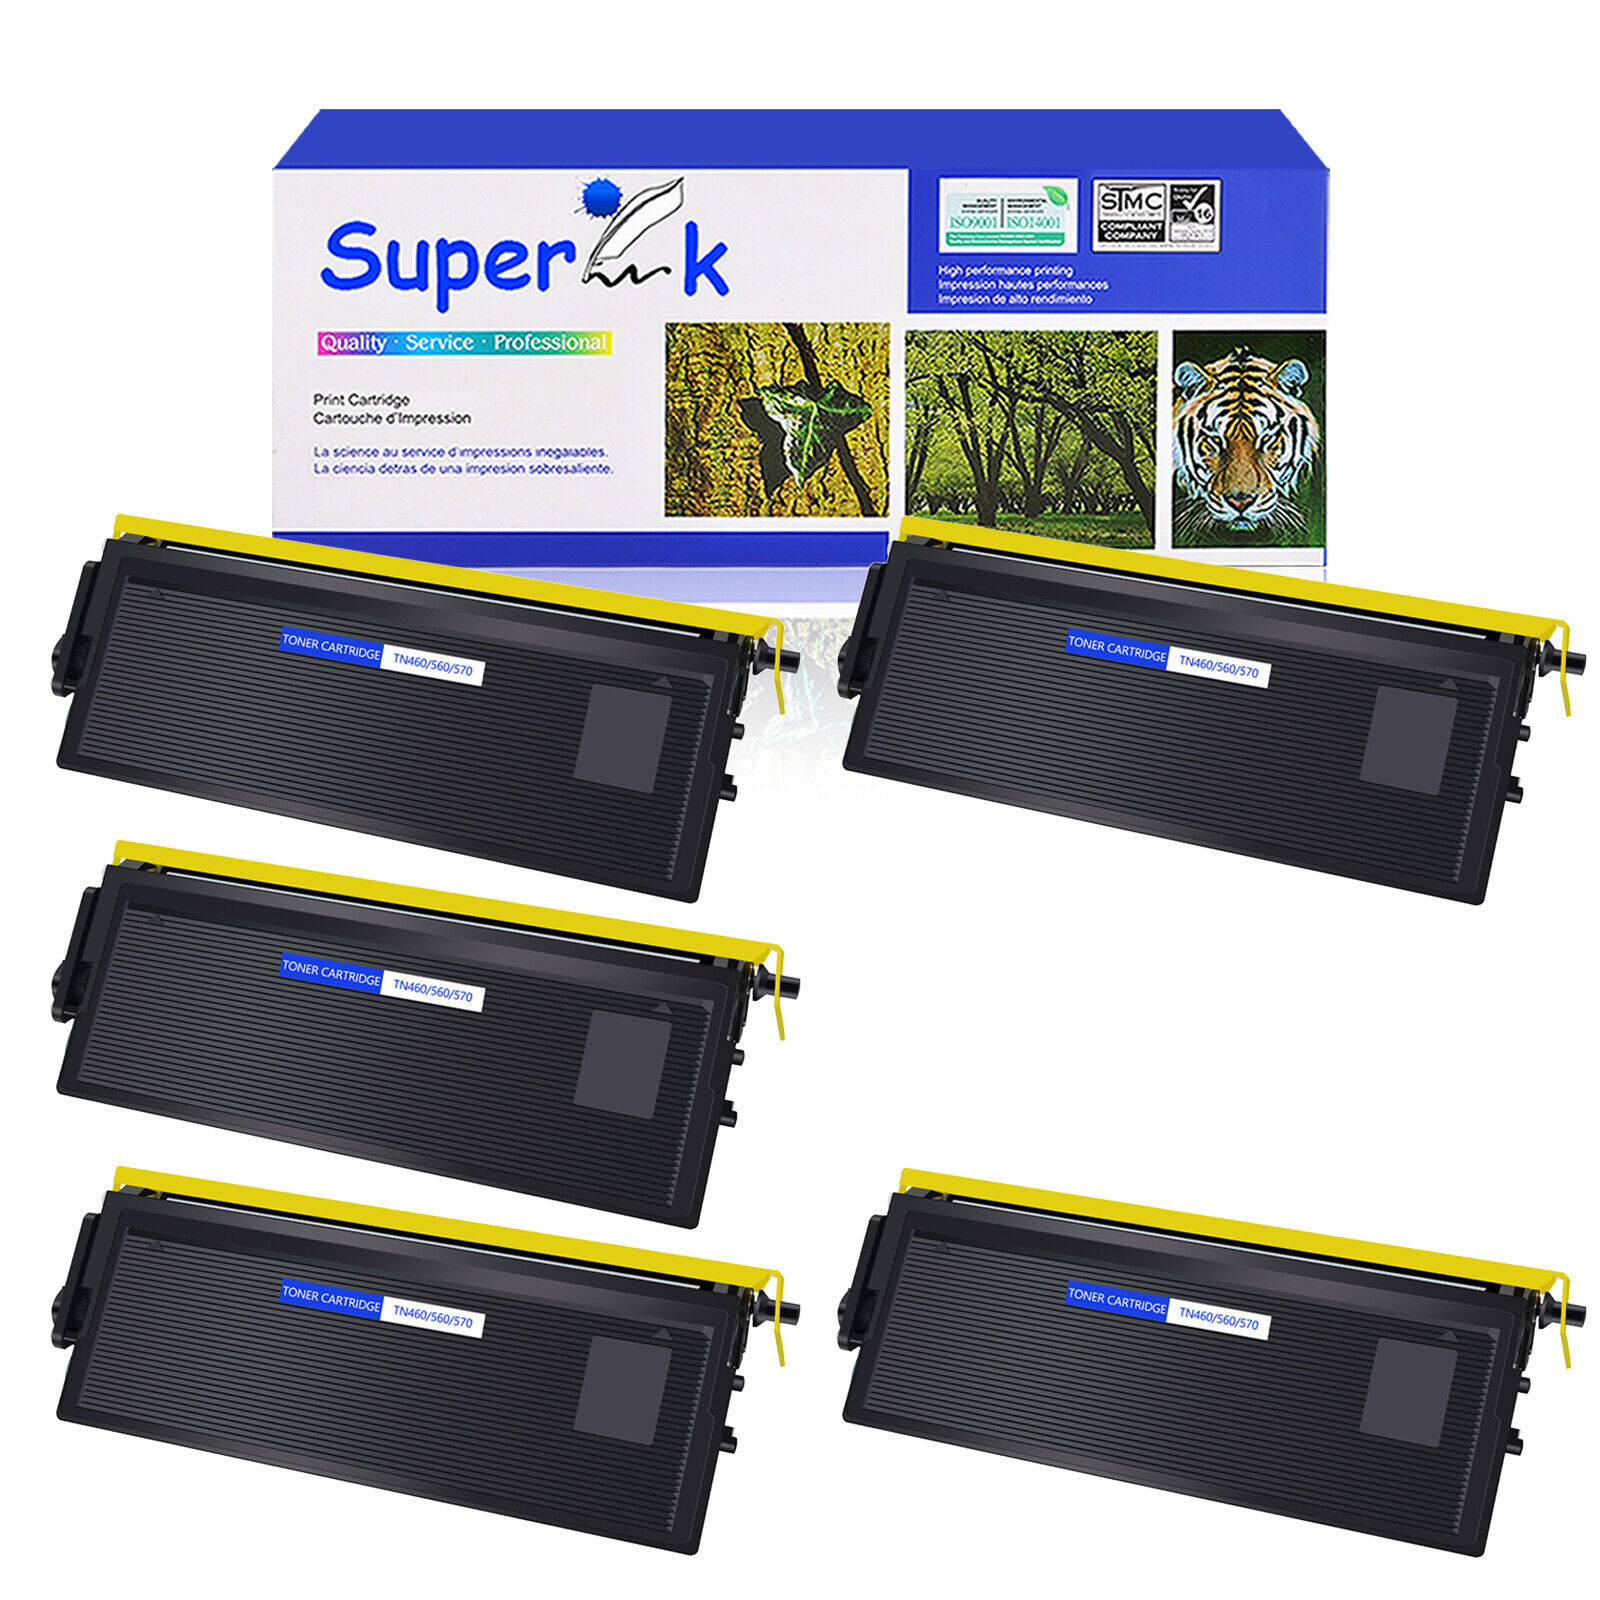 5 PACK - TN460 Toner for Brother TN-460 MFC-8700 MFC-9600 MFC-9650 MFC-9700